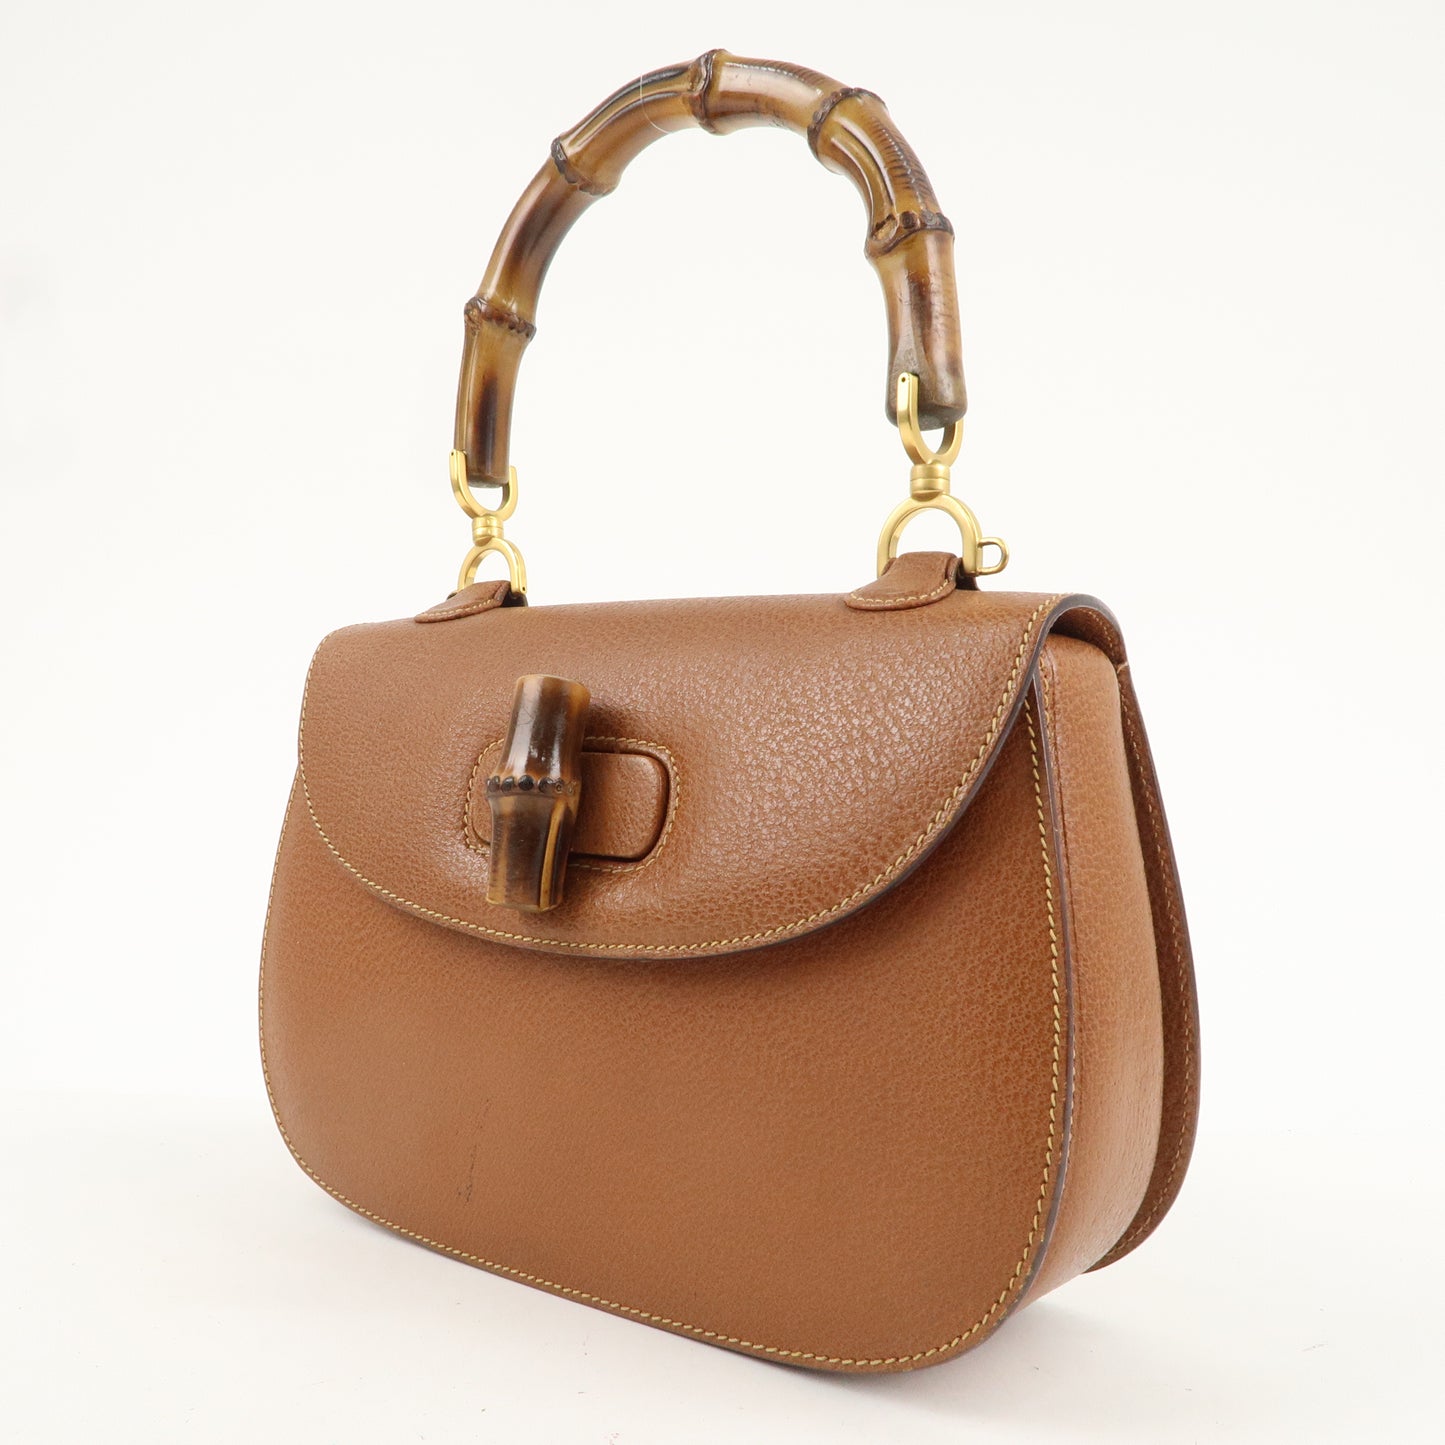 GUCCI Bamboo Leather Hand Bag Brown 000.2029.0633